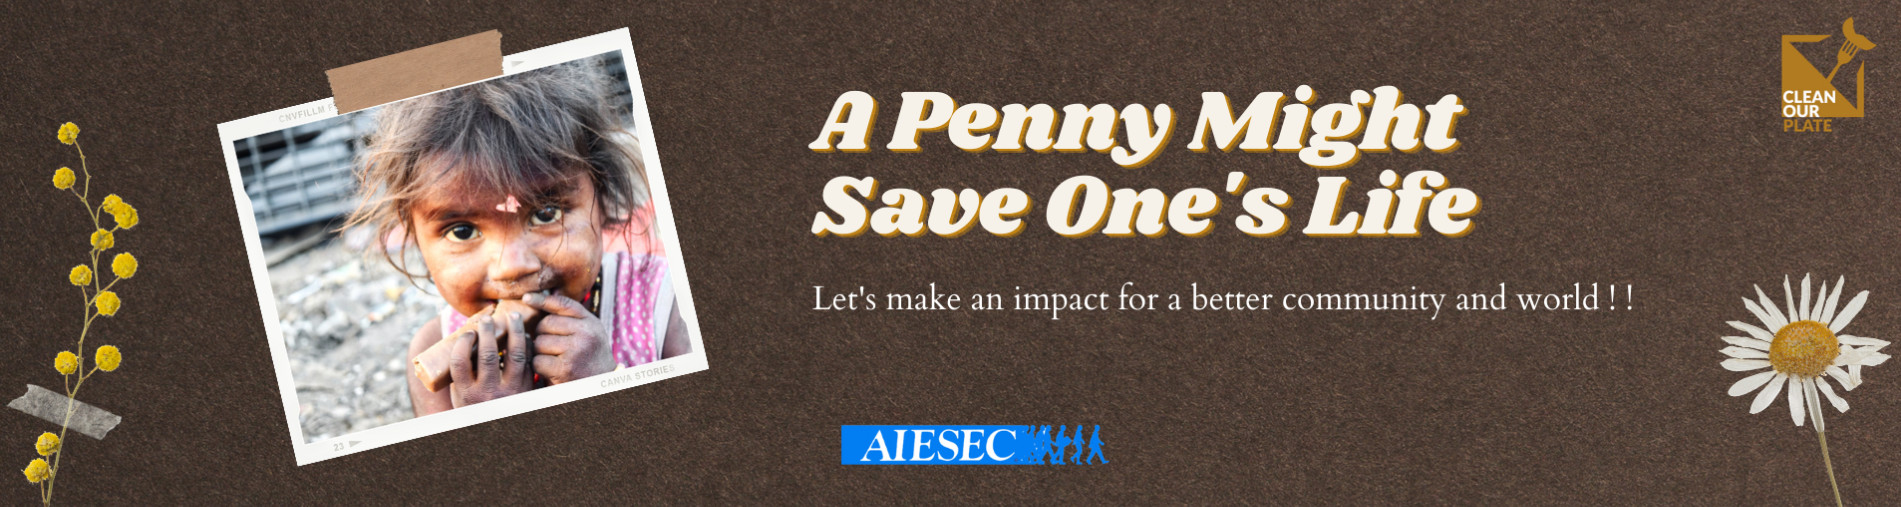 A Penny Might Save One’s Life